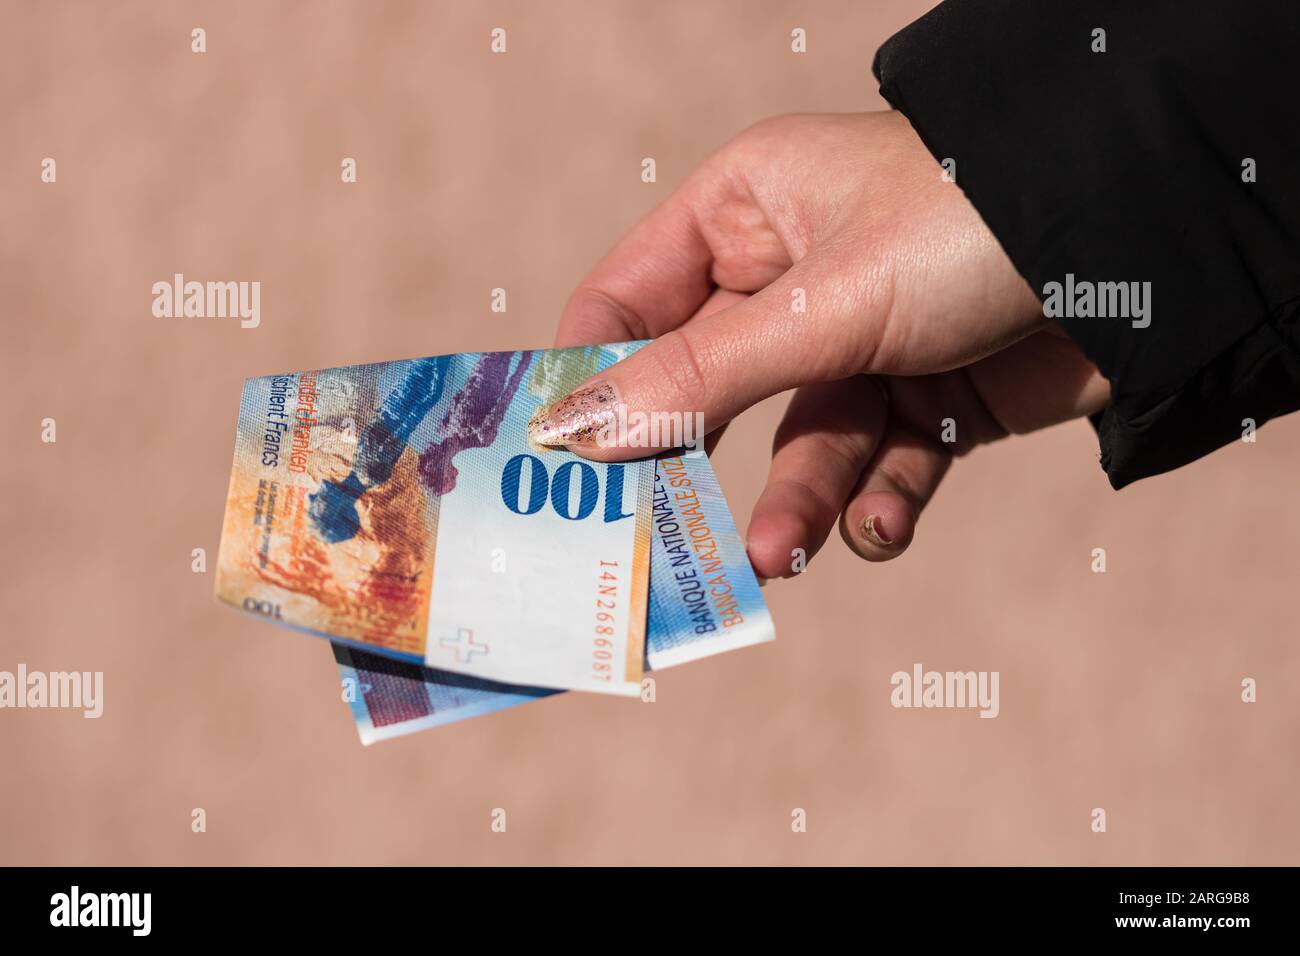 100 Chf High Resolution Stock Photography And Images Alamy